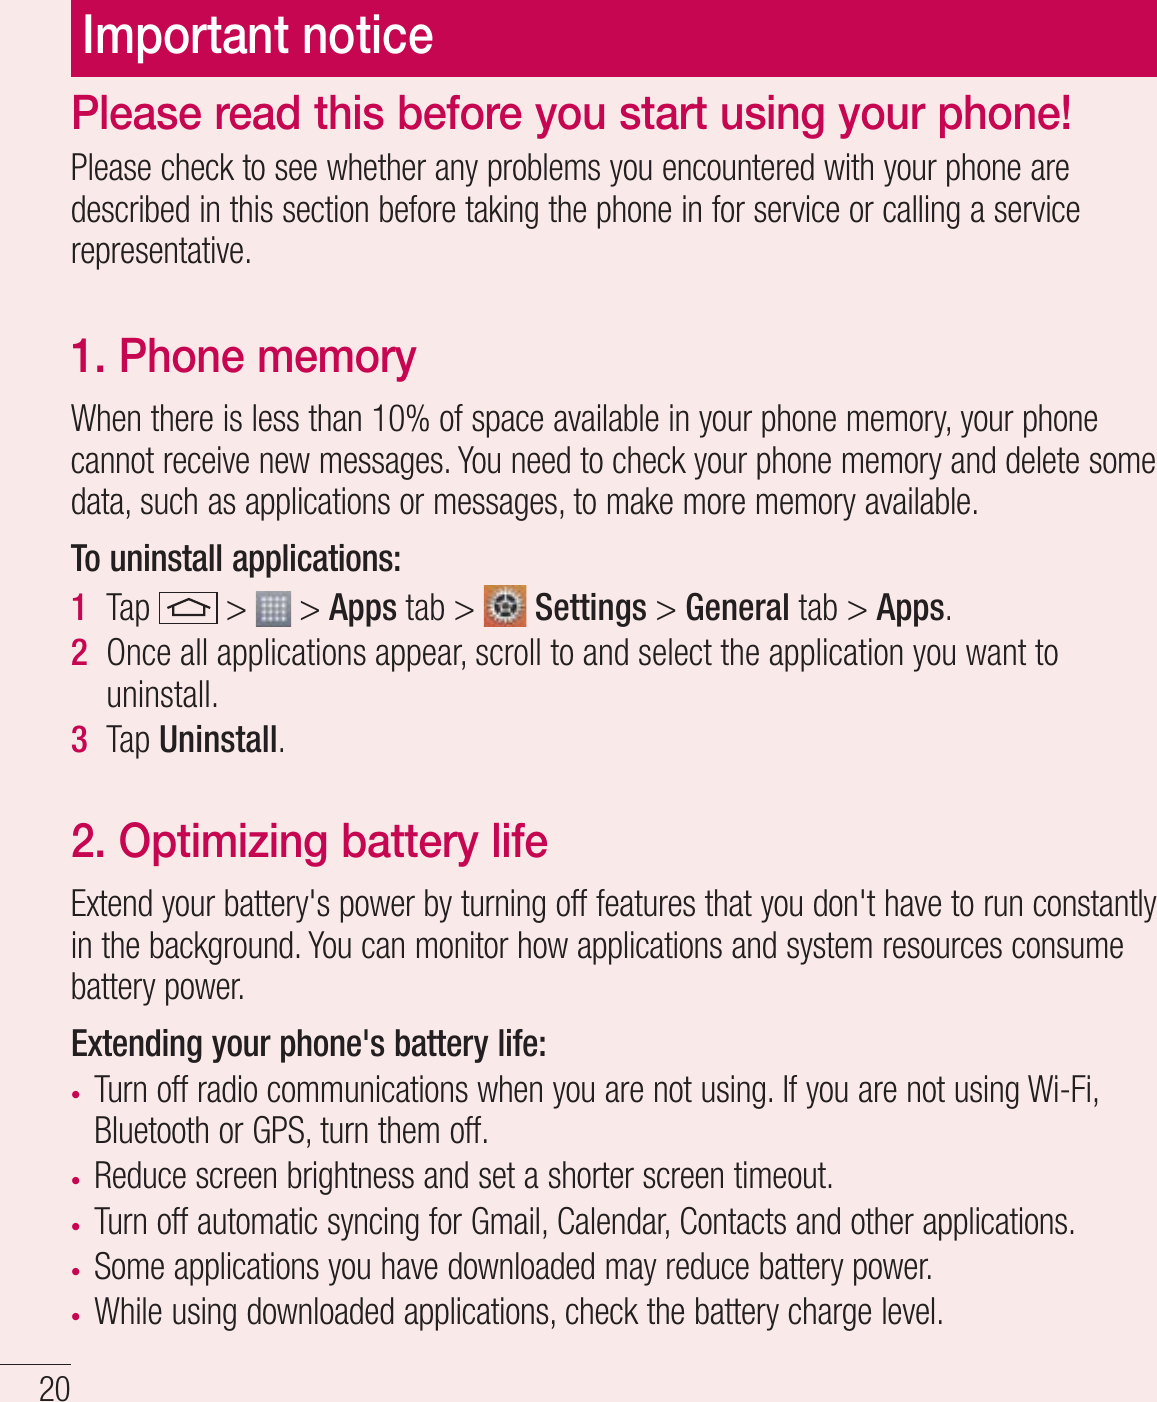 20Important noticePlease check to see whether any problems you encountered with your phone are described in this section before taking the phone in for service or calling a service representative.1. Phone memory When there is less than 10% of space available in your phone memory, your phone cannot receive new messages. You need to check your phone memory and delete some data, such as applications or messages, to make more memory available.To uninstall applications:1  Tap   &gt;   &gt; Apps tab &gt;   Settings &gt; General tab &gt; Apps.2  Once all applications appear, scroll to and select the application you want to uninstall.3  Tap Uninstall.2. Optimizing battery lifeExtend your battery&apos;s power by turning off features that you don&apos;t have to run constantly in the background. You can monitor how applications and system resources consume battery power.Extending your phone&apos;s battery life:t Turn off radio communications when you are not using. If you are not using Wi-Fi, Bluetooth or GPS, turn them off.t Reduce screen brightness and set a shorter screen timeout.t Turn off automatic syncing for Gmail, Calendar, Contacts and other applications.t Some applications you have downloaded may reduce battery power.t While using downloaded applications, check the battery charge level.Please read this before you start using your phone!